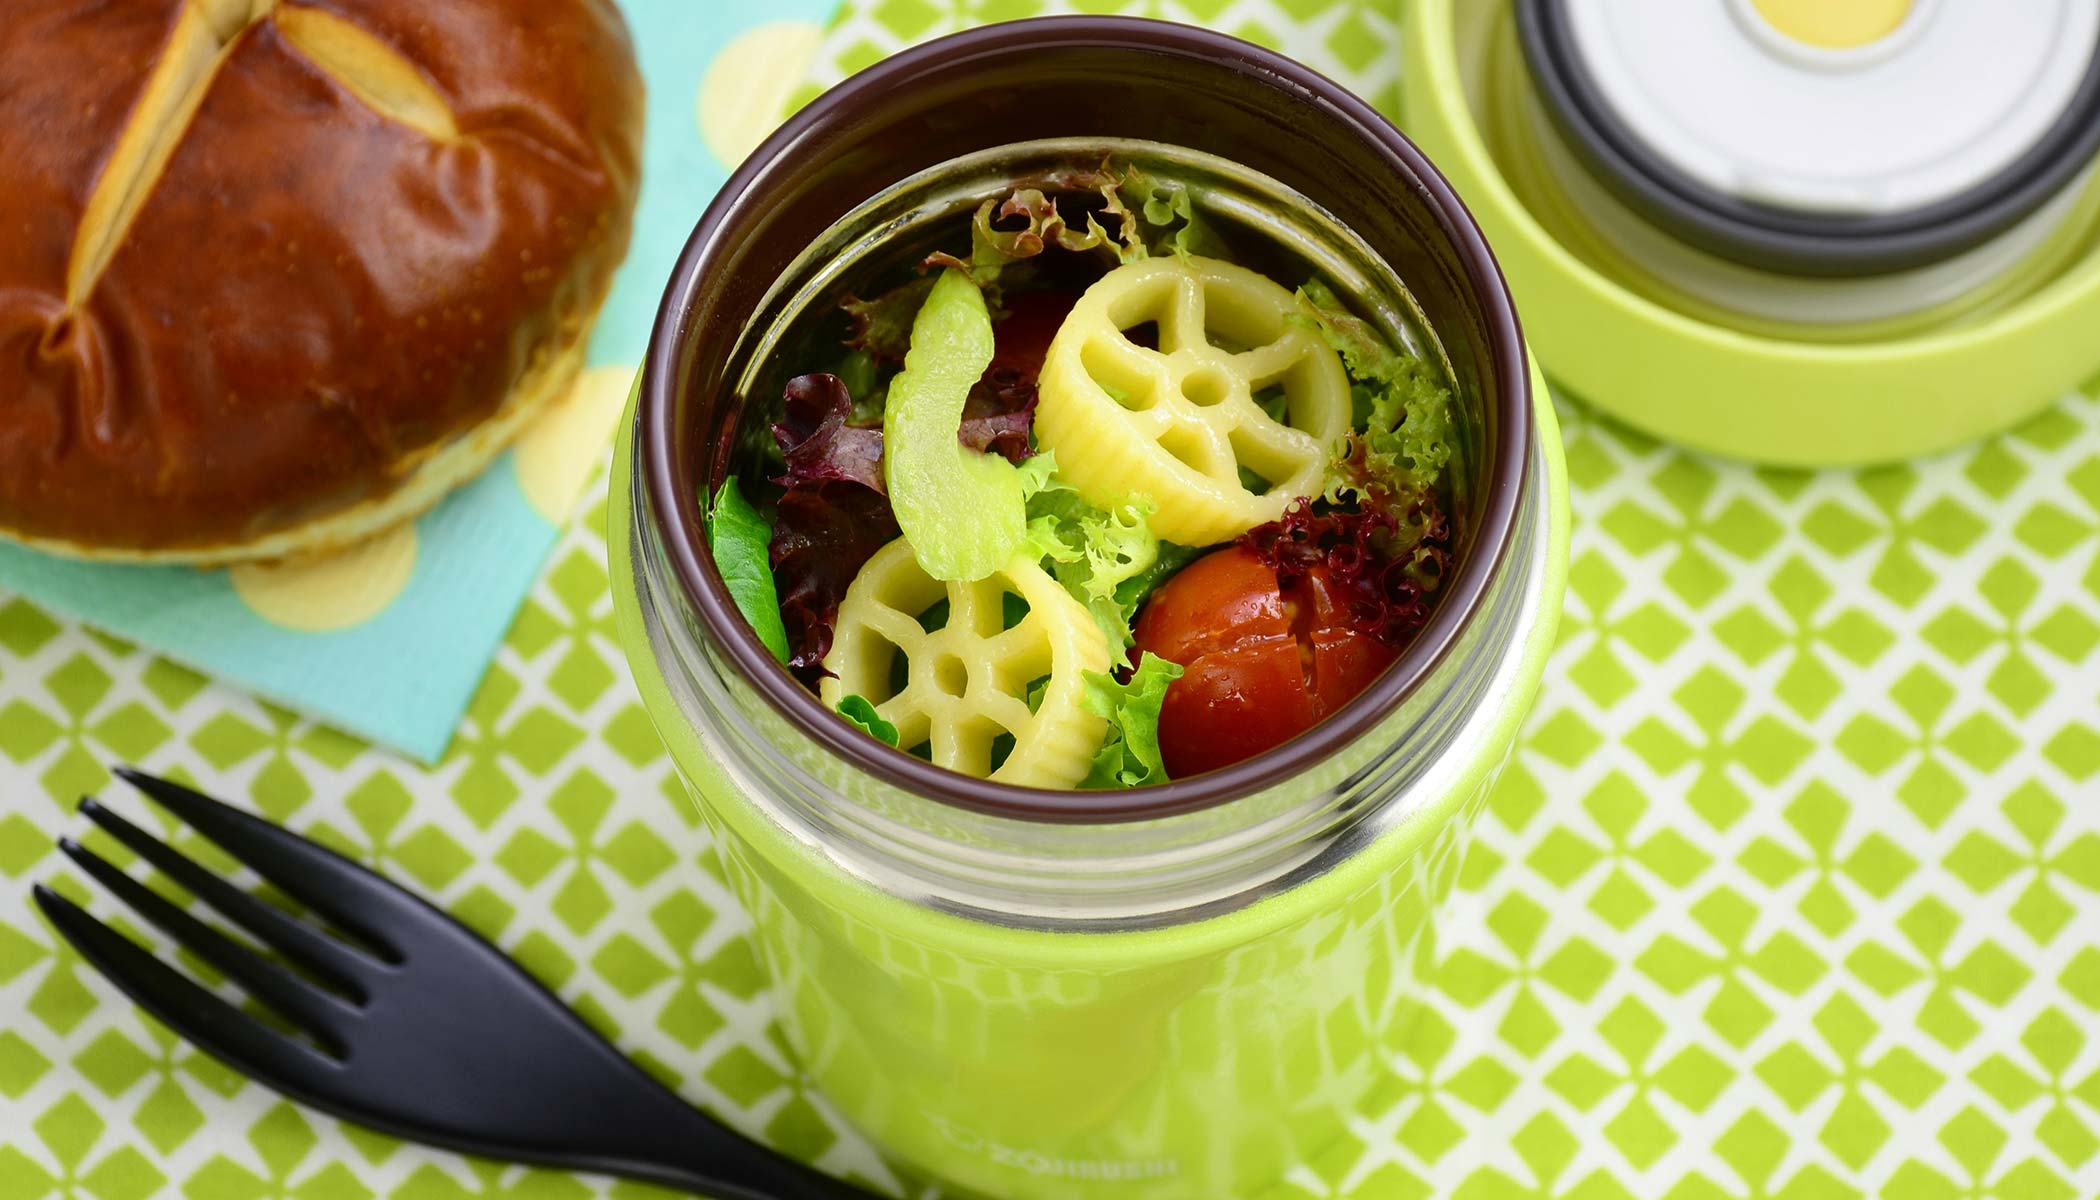 Pinwheel pasta salad with lettuce and tomato served in a green vacuum insulated food jar and a pretzel bun